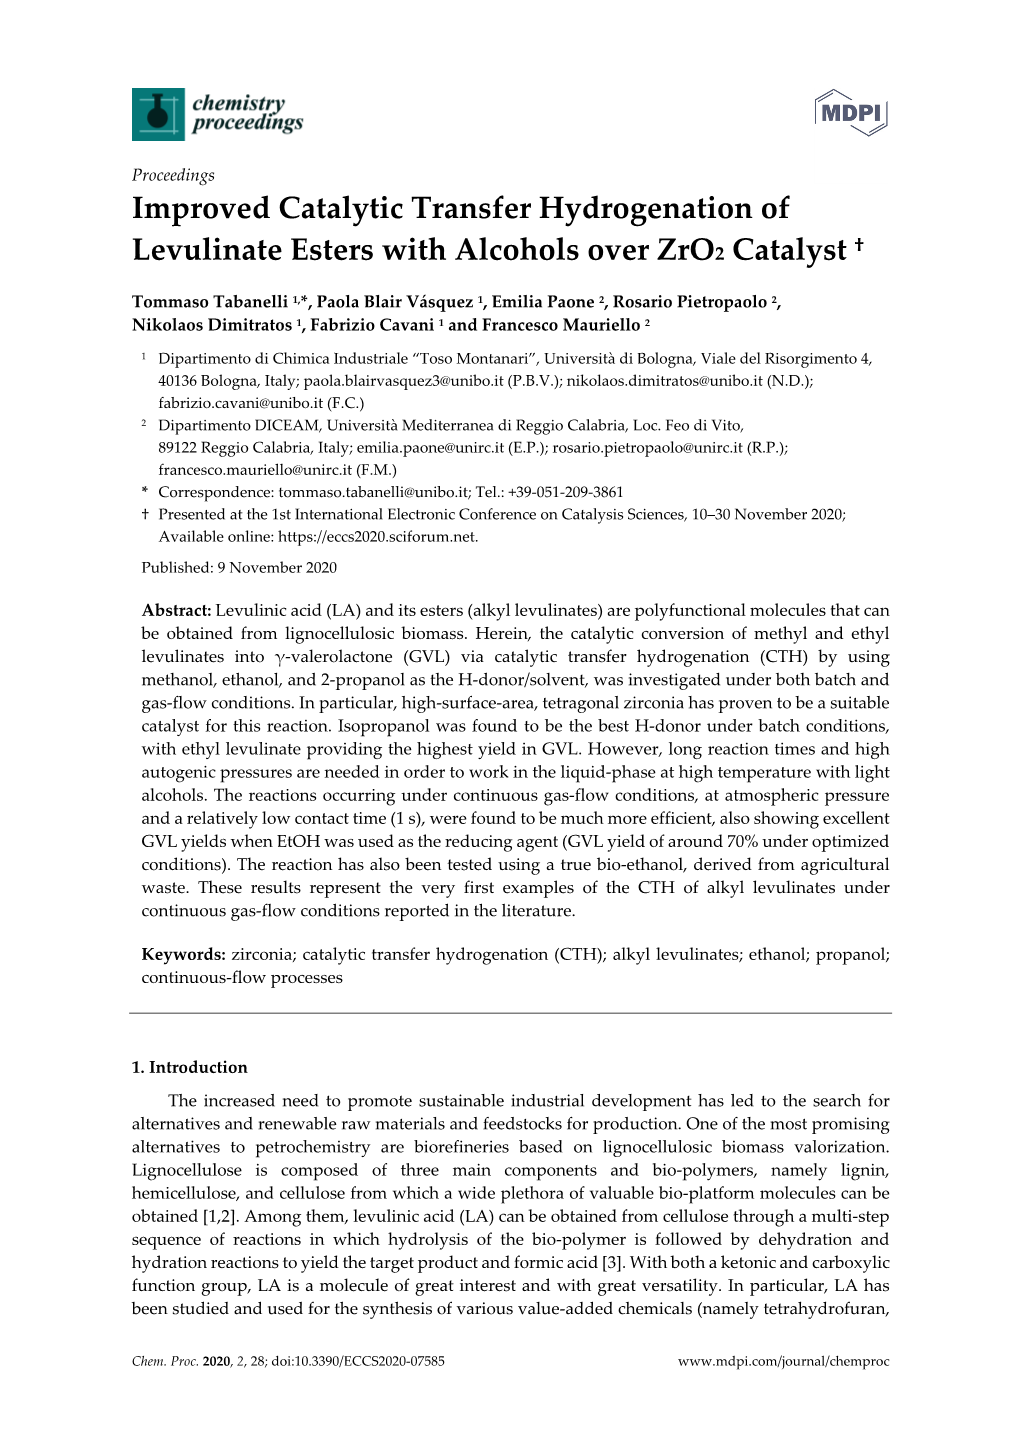 Improved Catalytic Transfer Hydrogenation of Levulinate Esters with Alcohols Over Zro2 Catalyst †